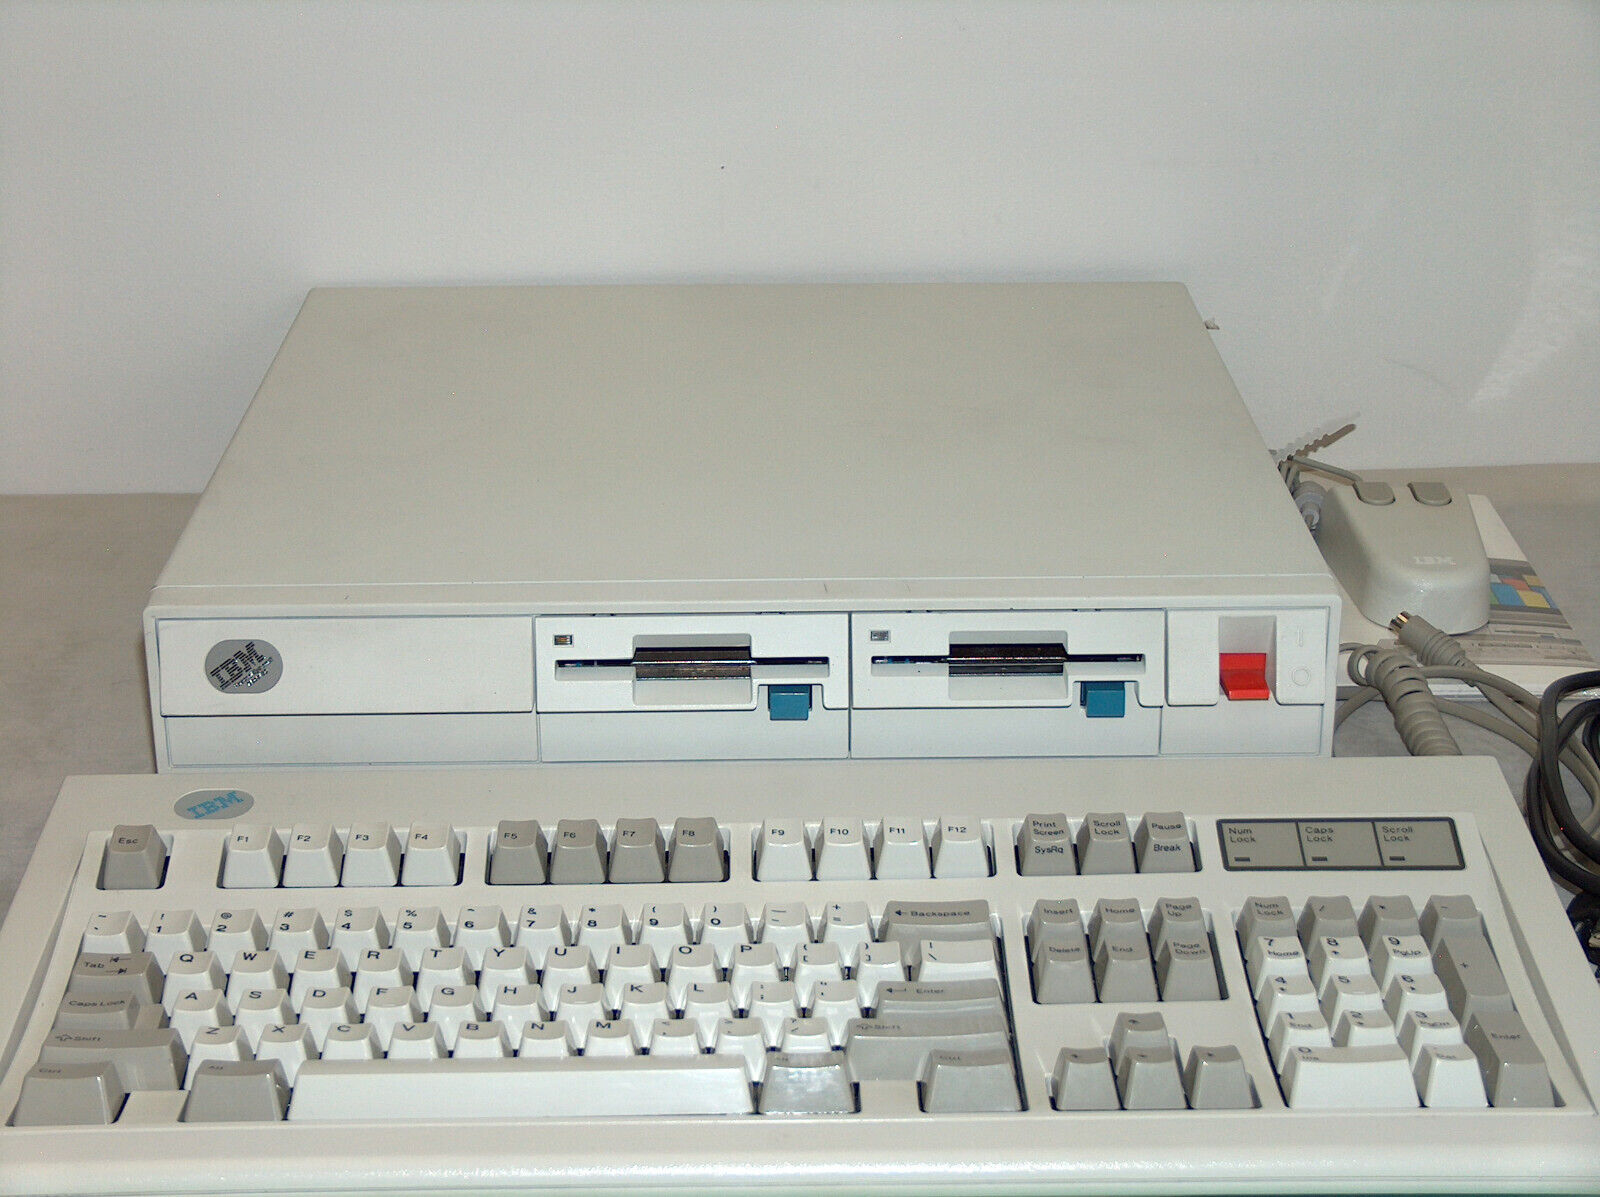 IBM Personal System PS/2 Computer Model 8530 & Accessories